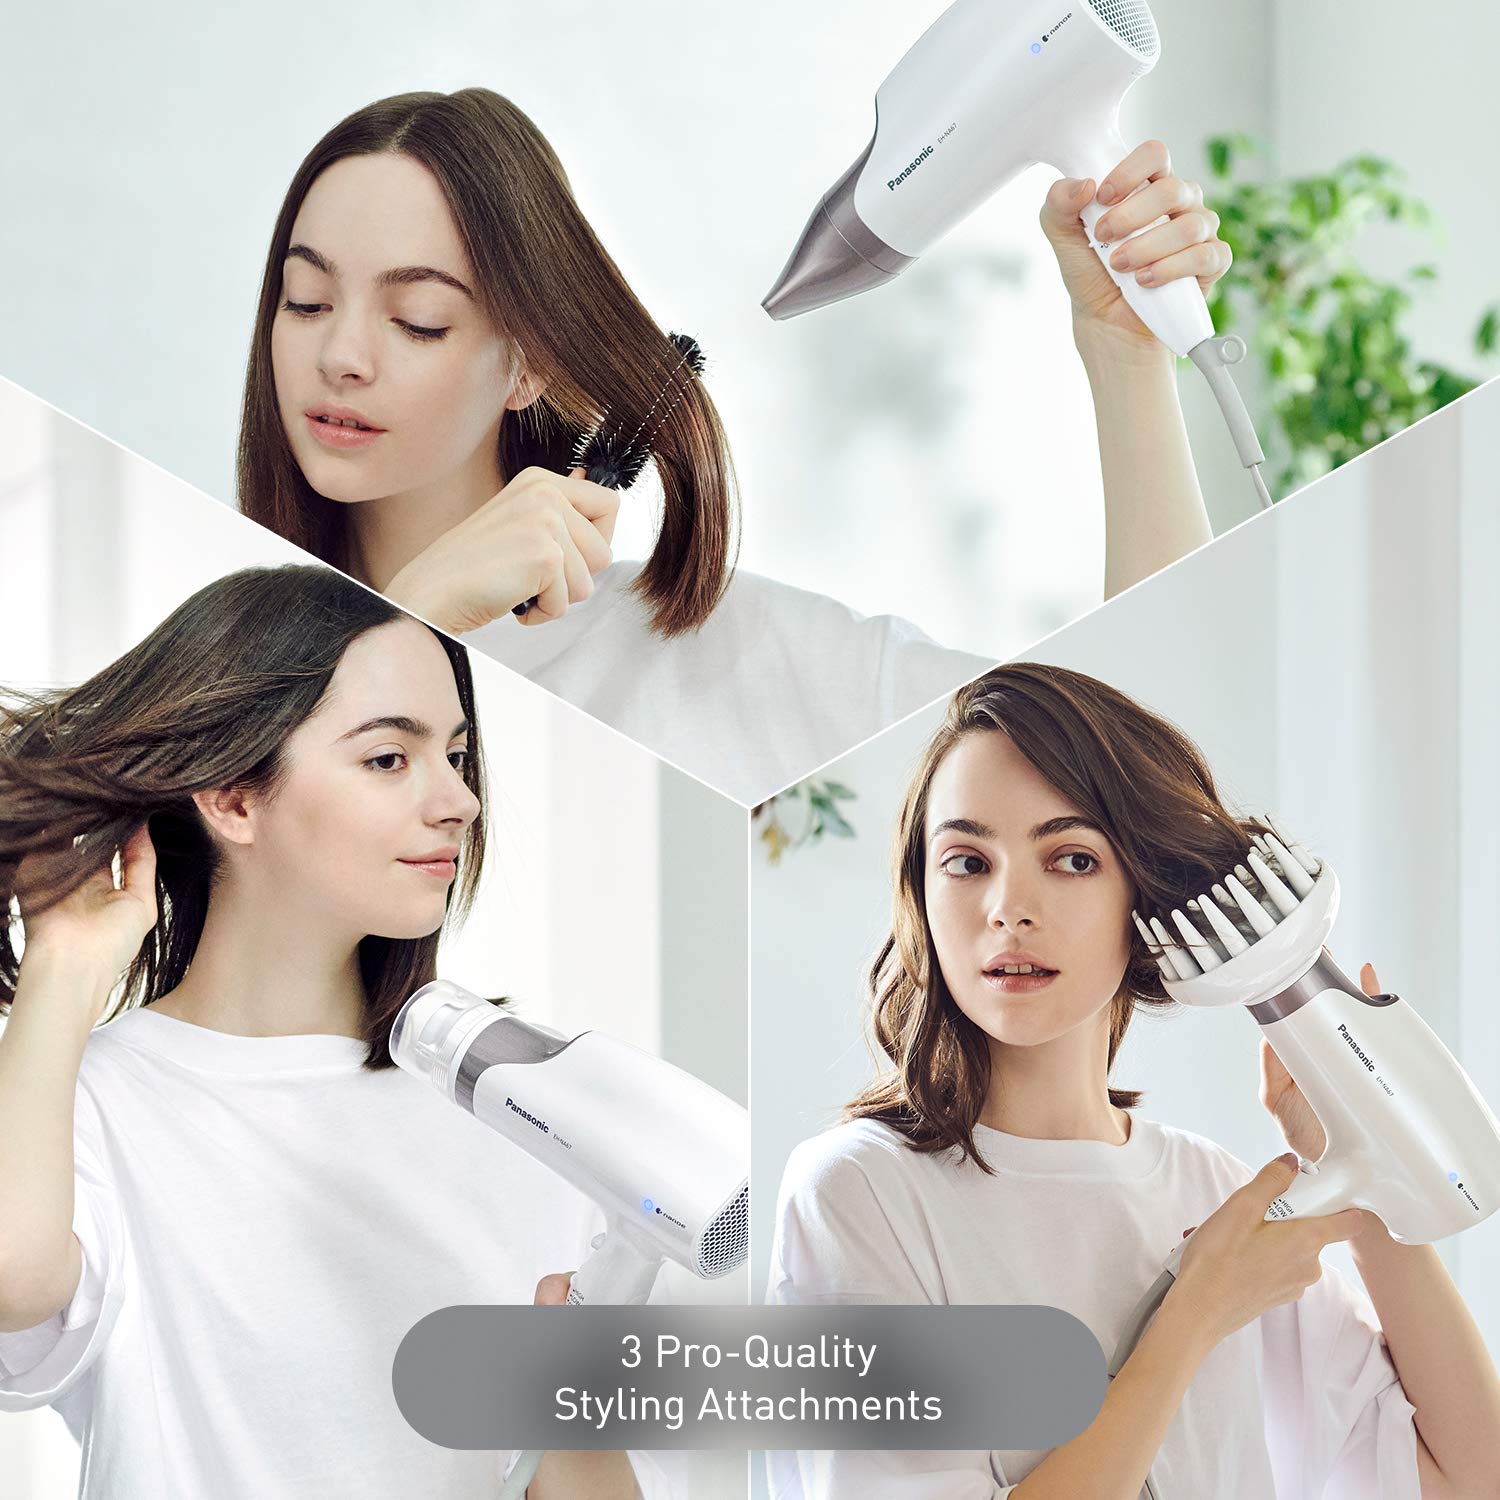 Panasonic Nanoe Salon Hair Dryer with Oscillating QuickDry Nozzle, Diffuser and Concentrator Attachments, 3 Speed Heat Settings for Easy Styling and Healthy Hair - EH-NA67-W (White) : Beauty & Personal Care